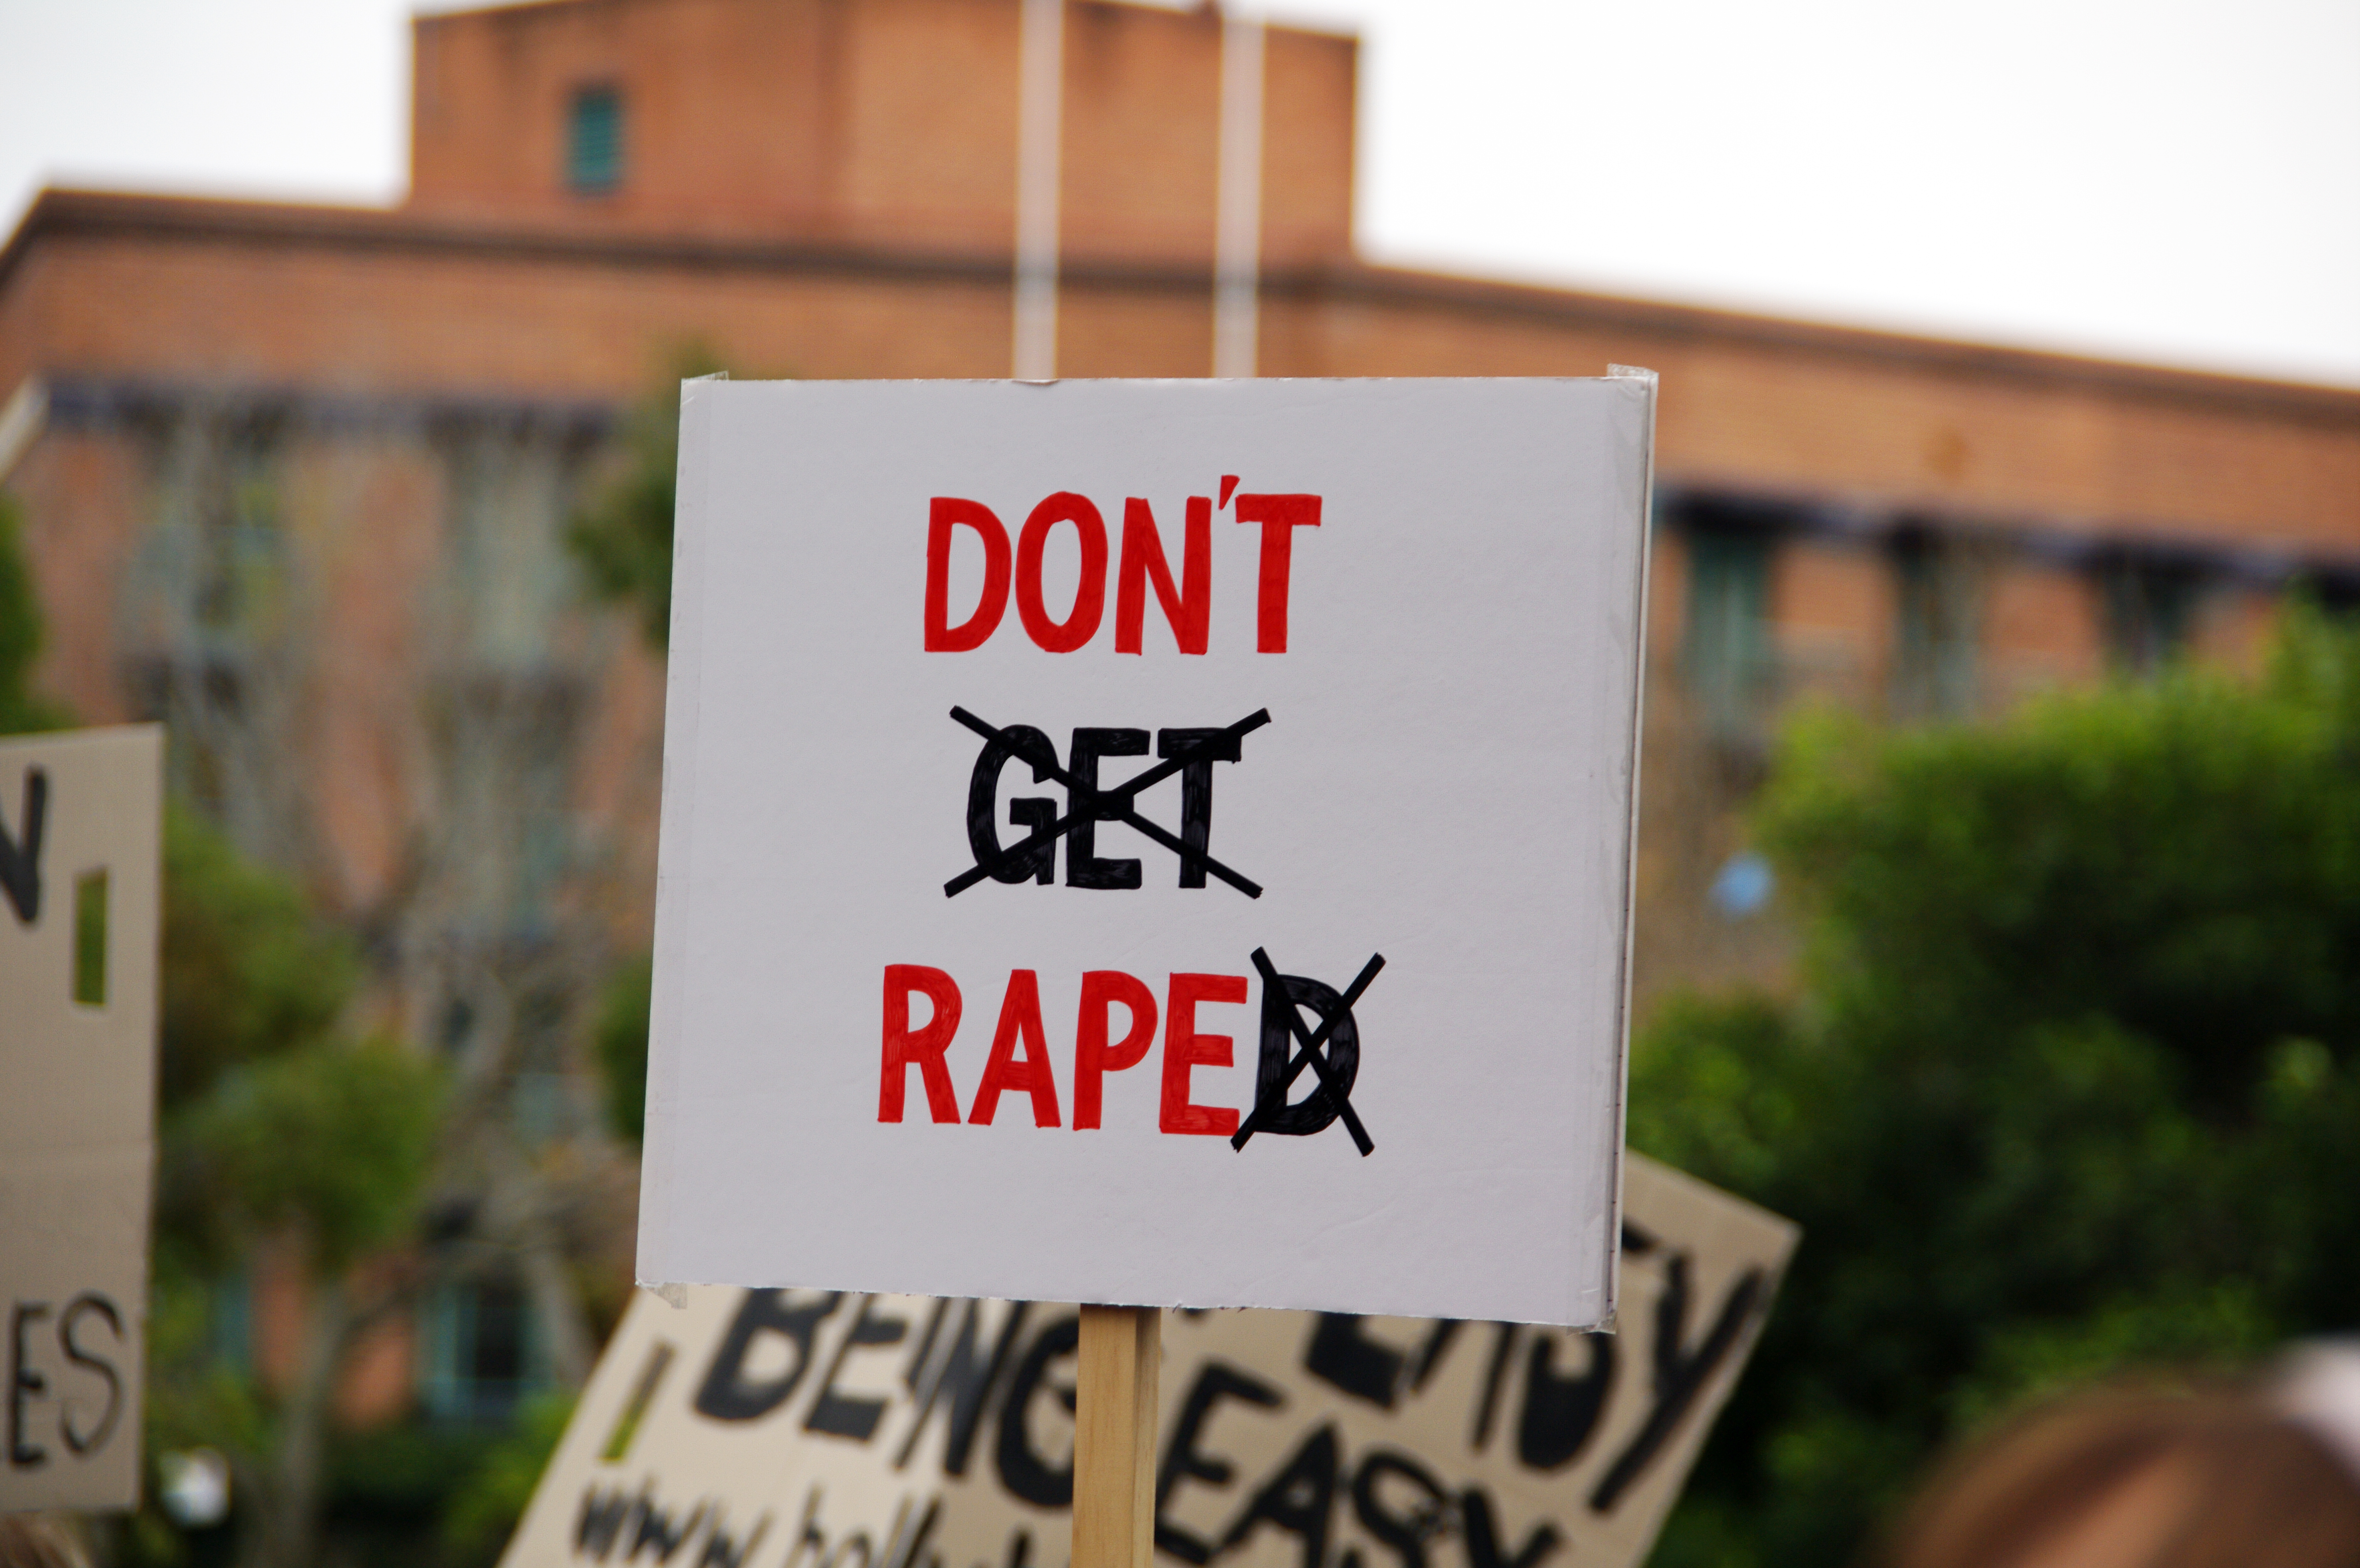 What's Rape Culture? How Does It Affect Women's Safety? - Sayfty